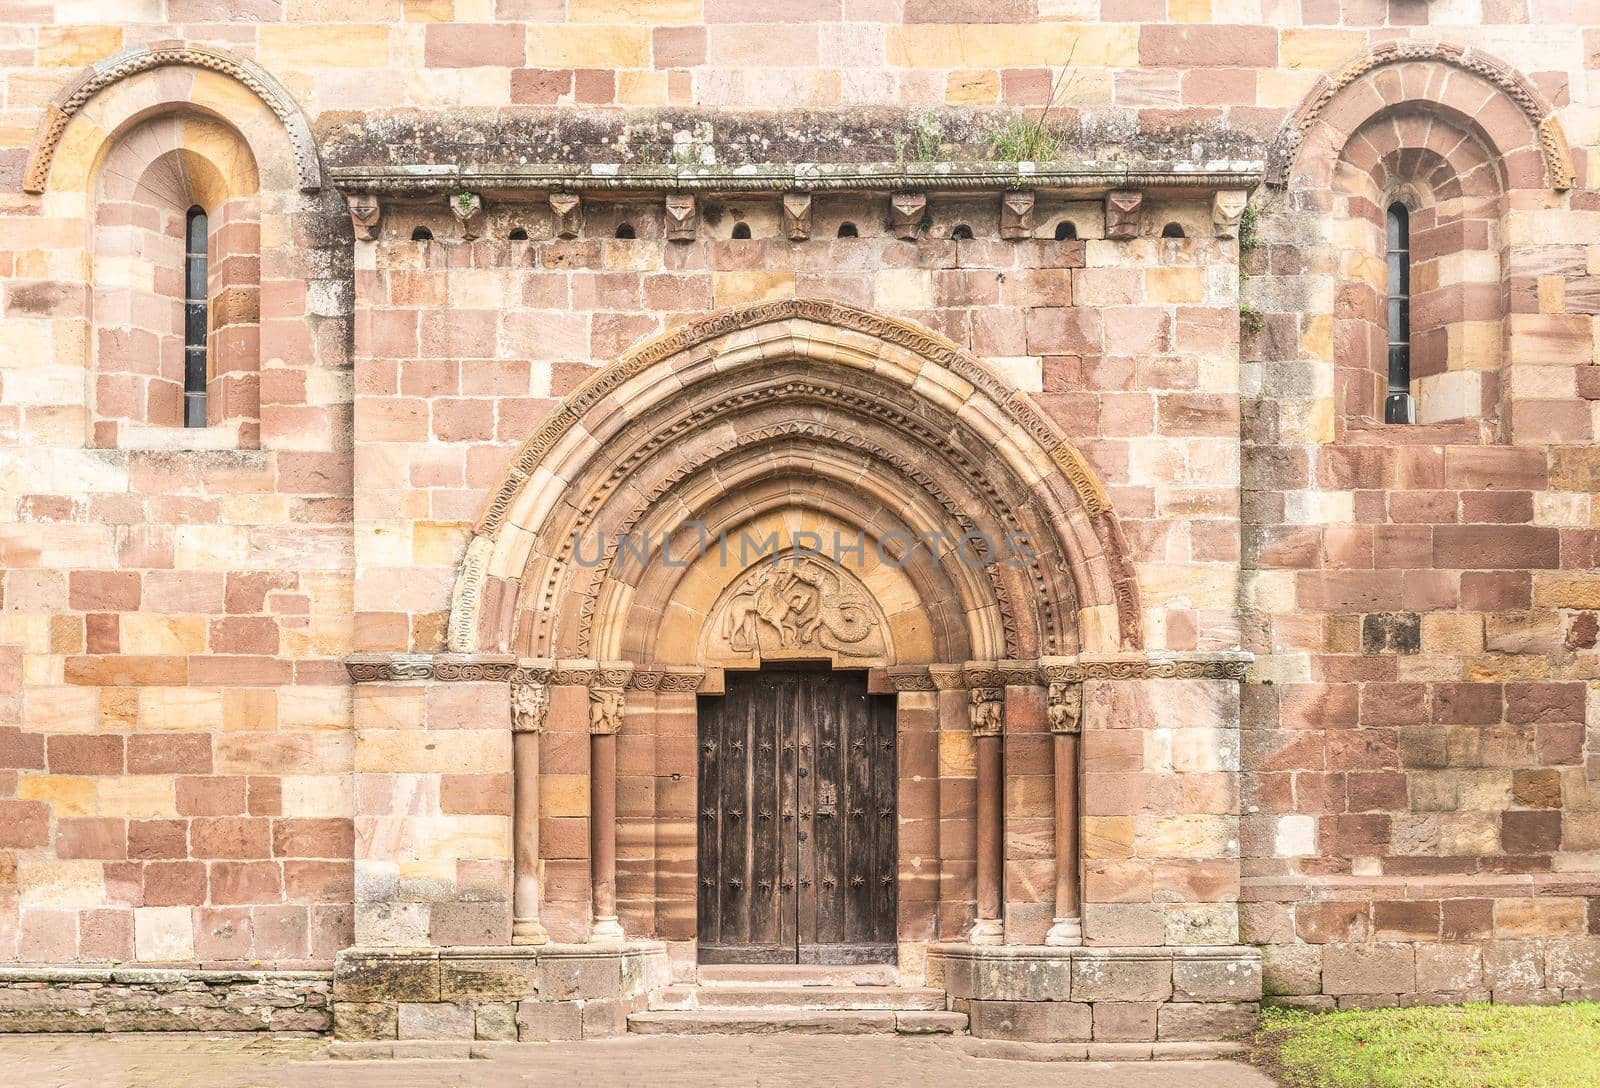 Exterior view of aged stone Romanesque church entrance with arched doorway and ornamental brick walls in Spain in Cantabria